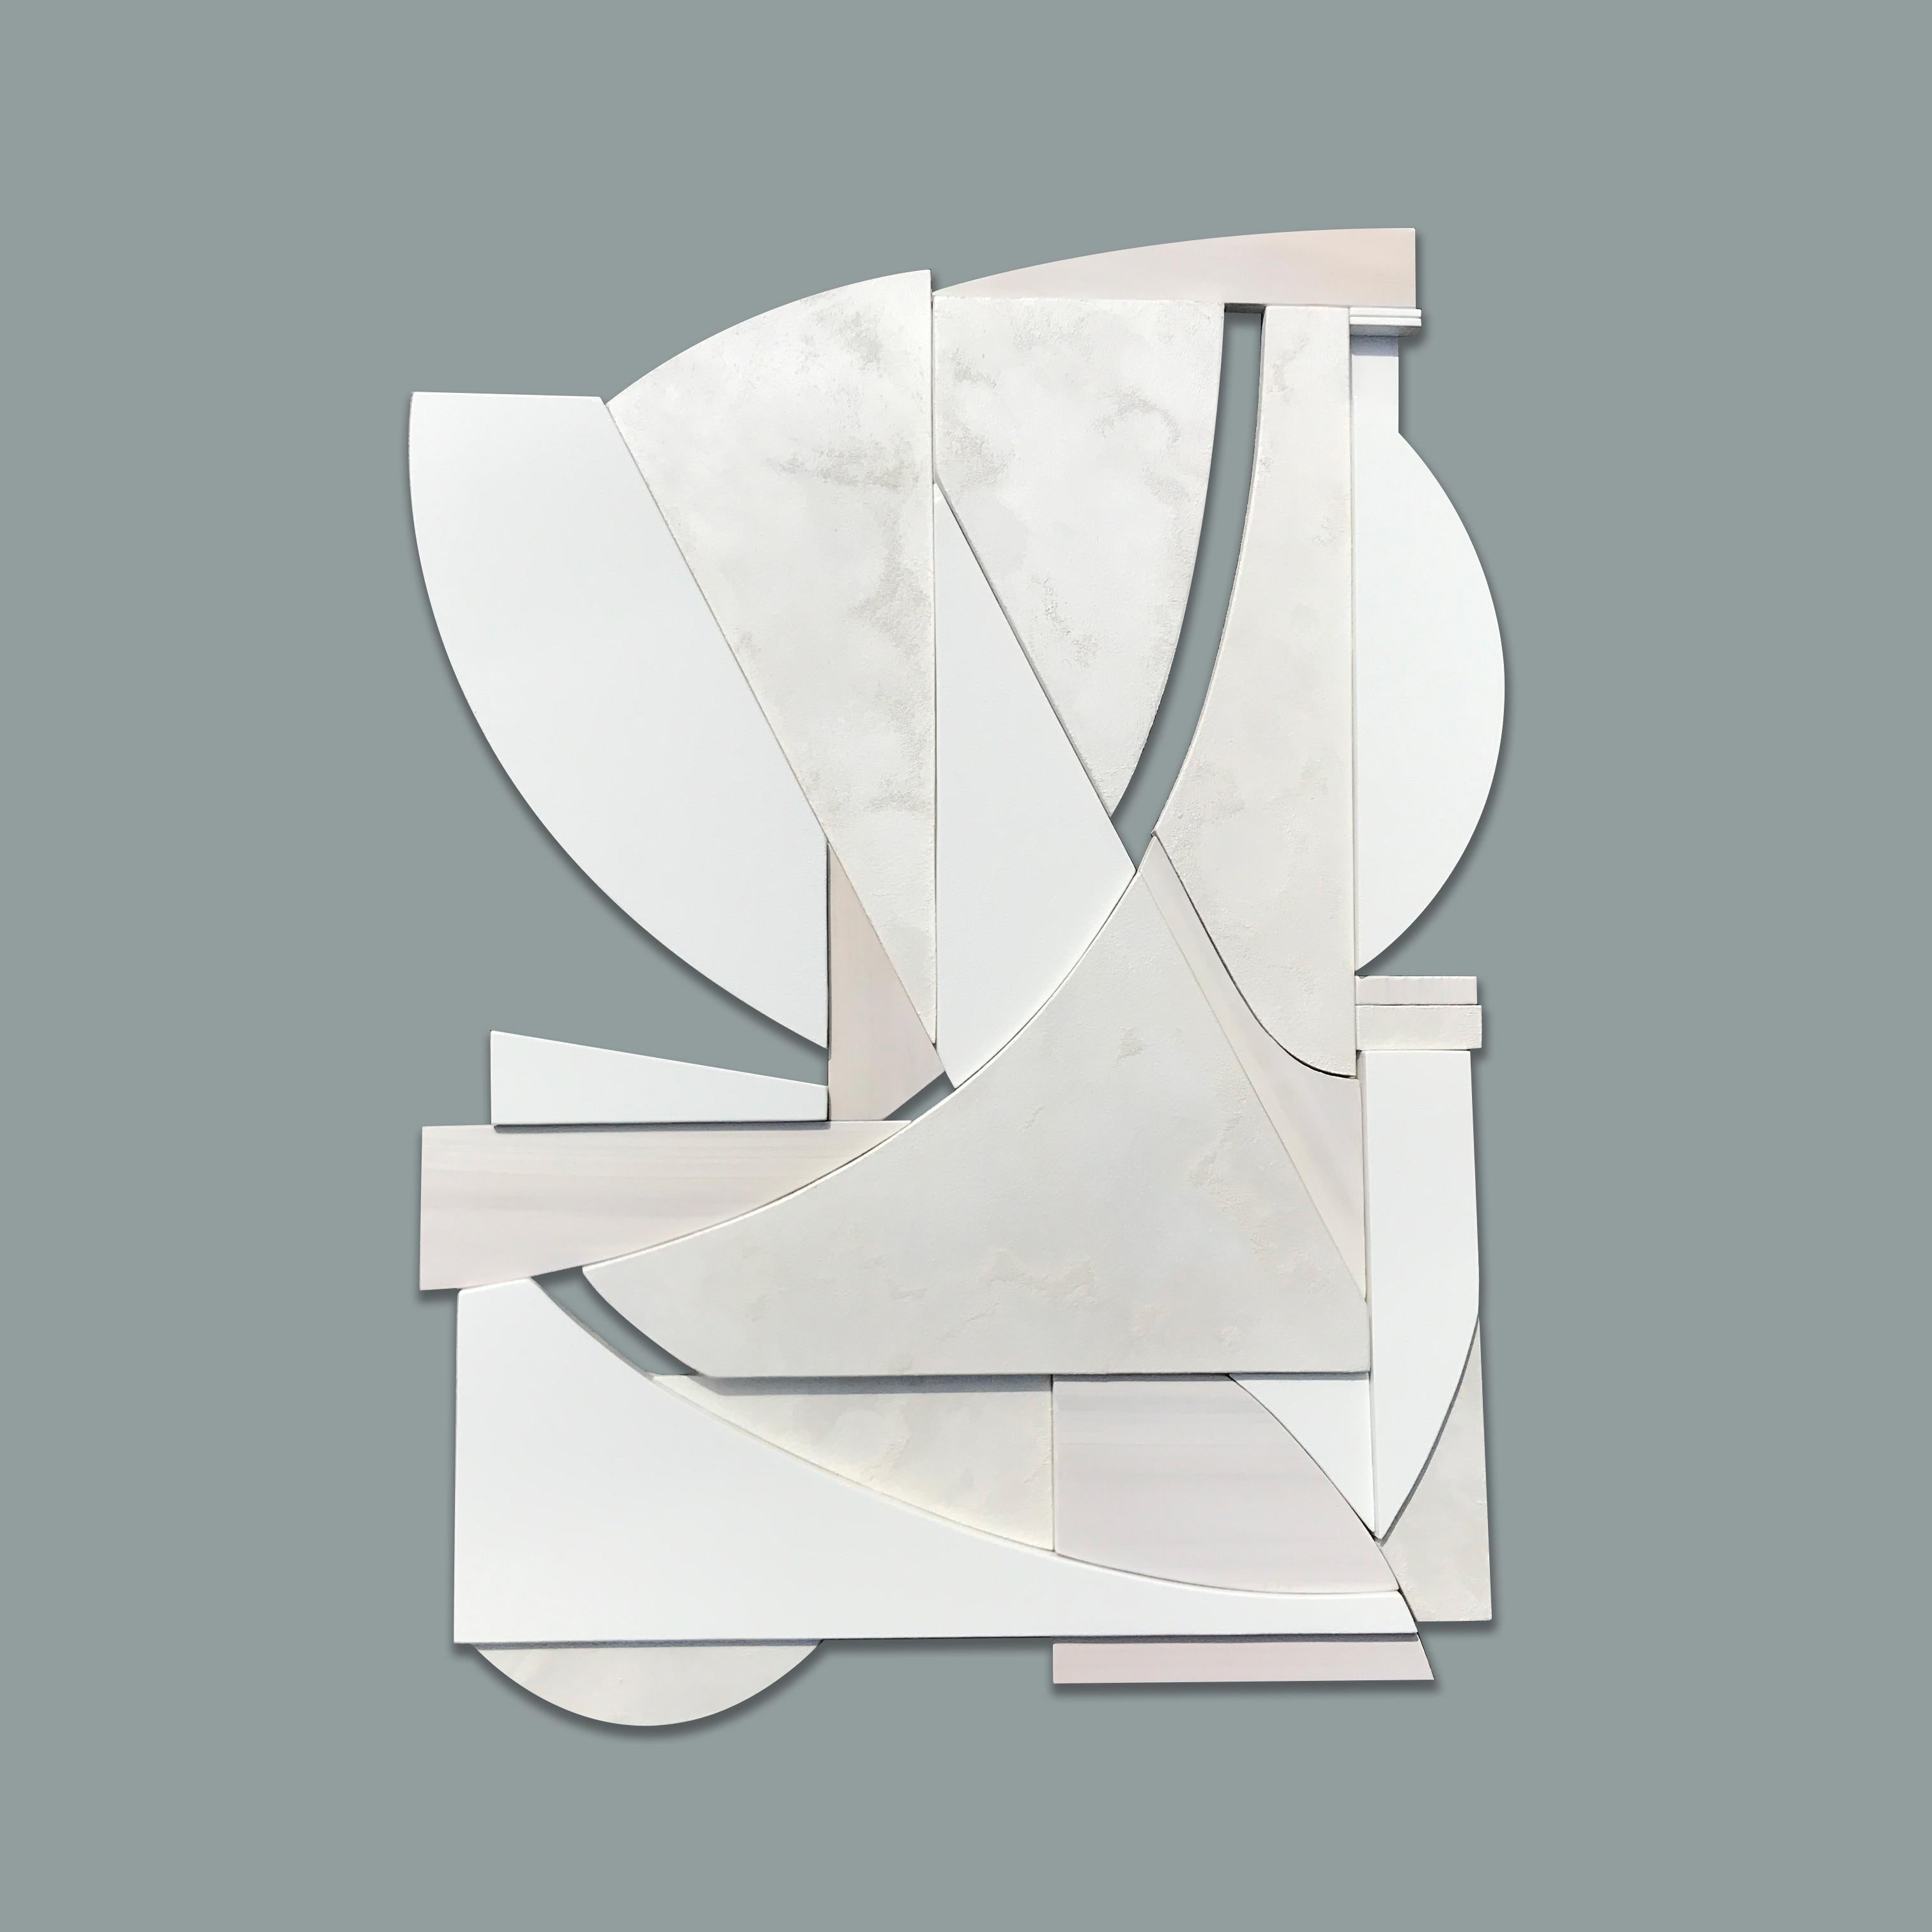 Blanco is a monochrome and elegant minimalist art deco wall sculpture. It is constructed with high-end birch plywood, acrylic washes and completed with a hand waxed finish. The acrylic wash allows the Blanco is a modern mixed media wall sculpture.